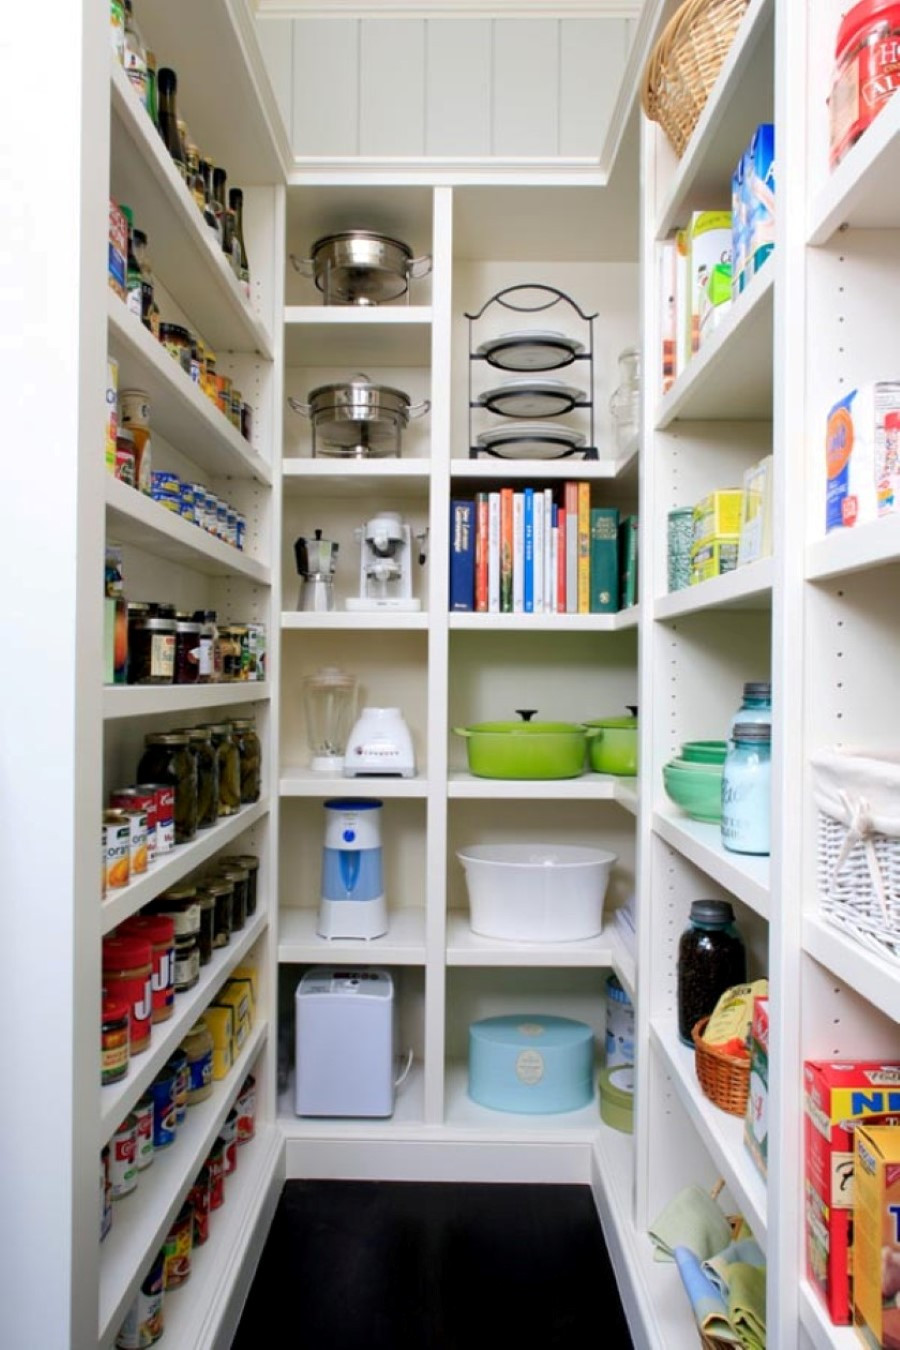 Kitchen Pantry Storage
 15 Kitchen Pantry Ideas With Form And Function